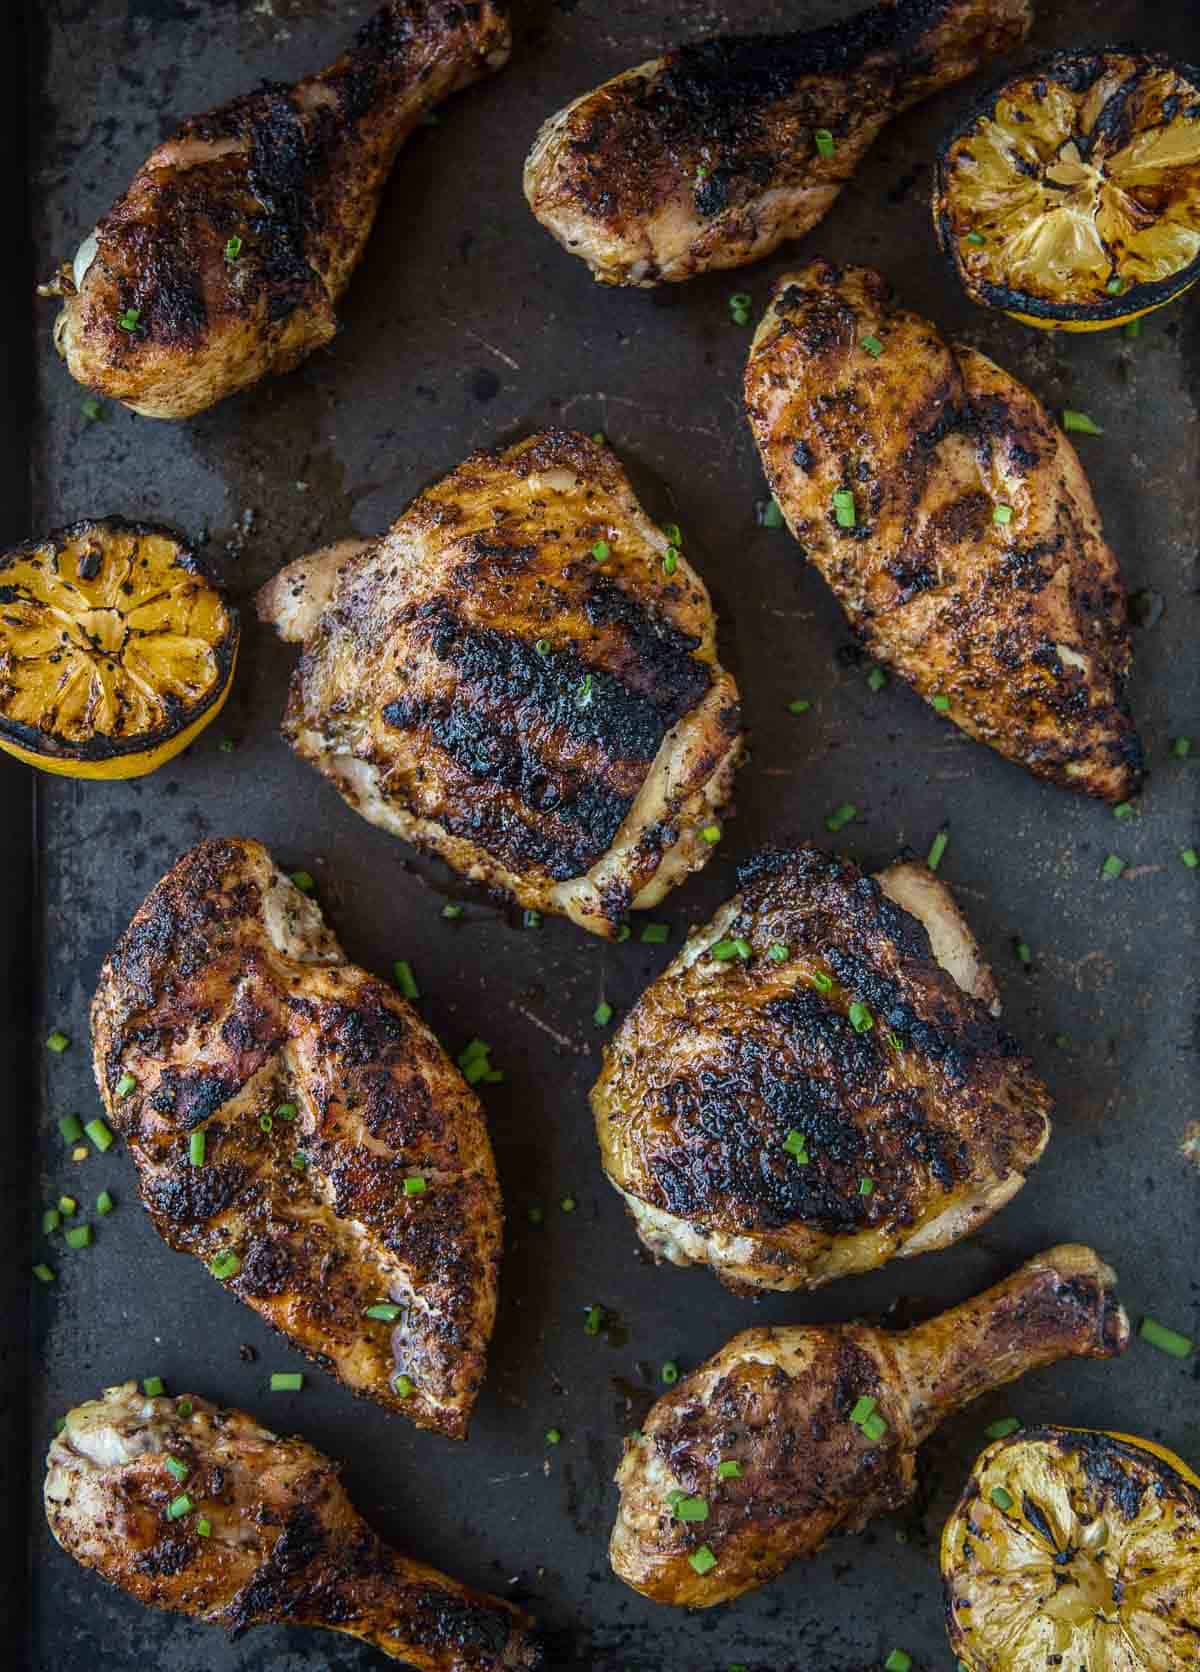 Perfectly grilled chicken pieces on a serving platter